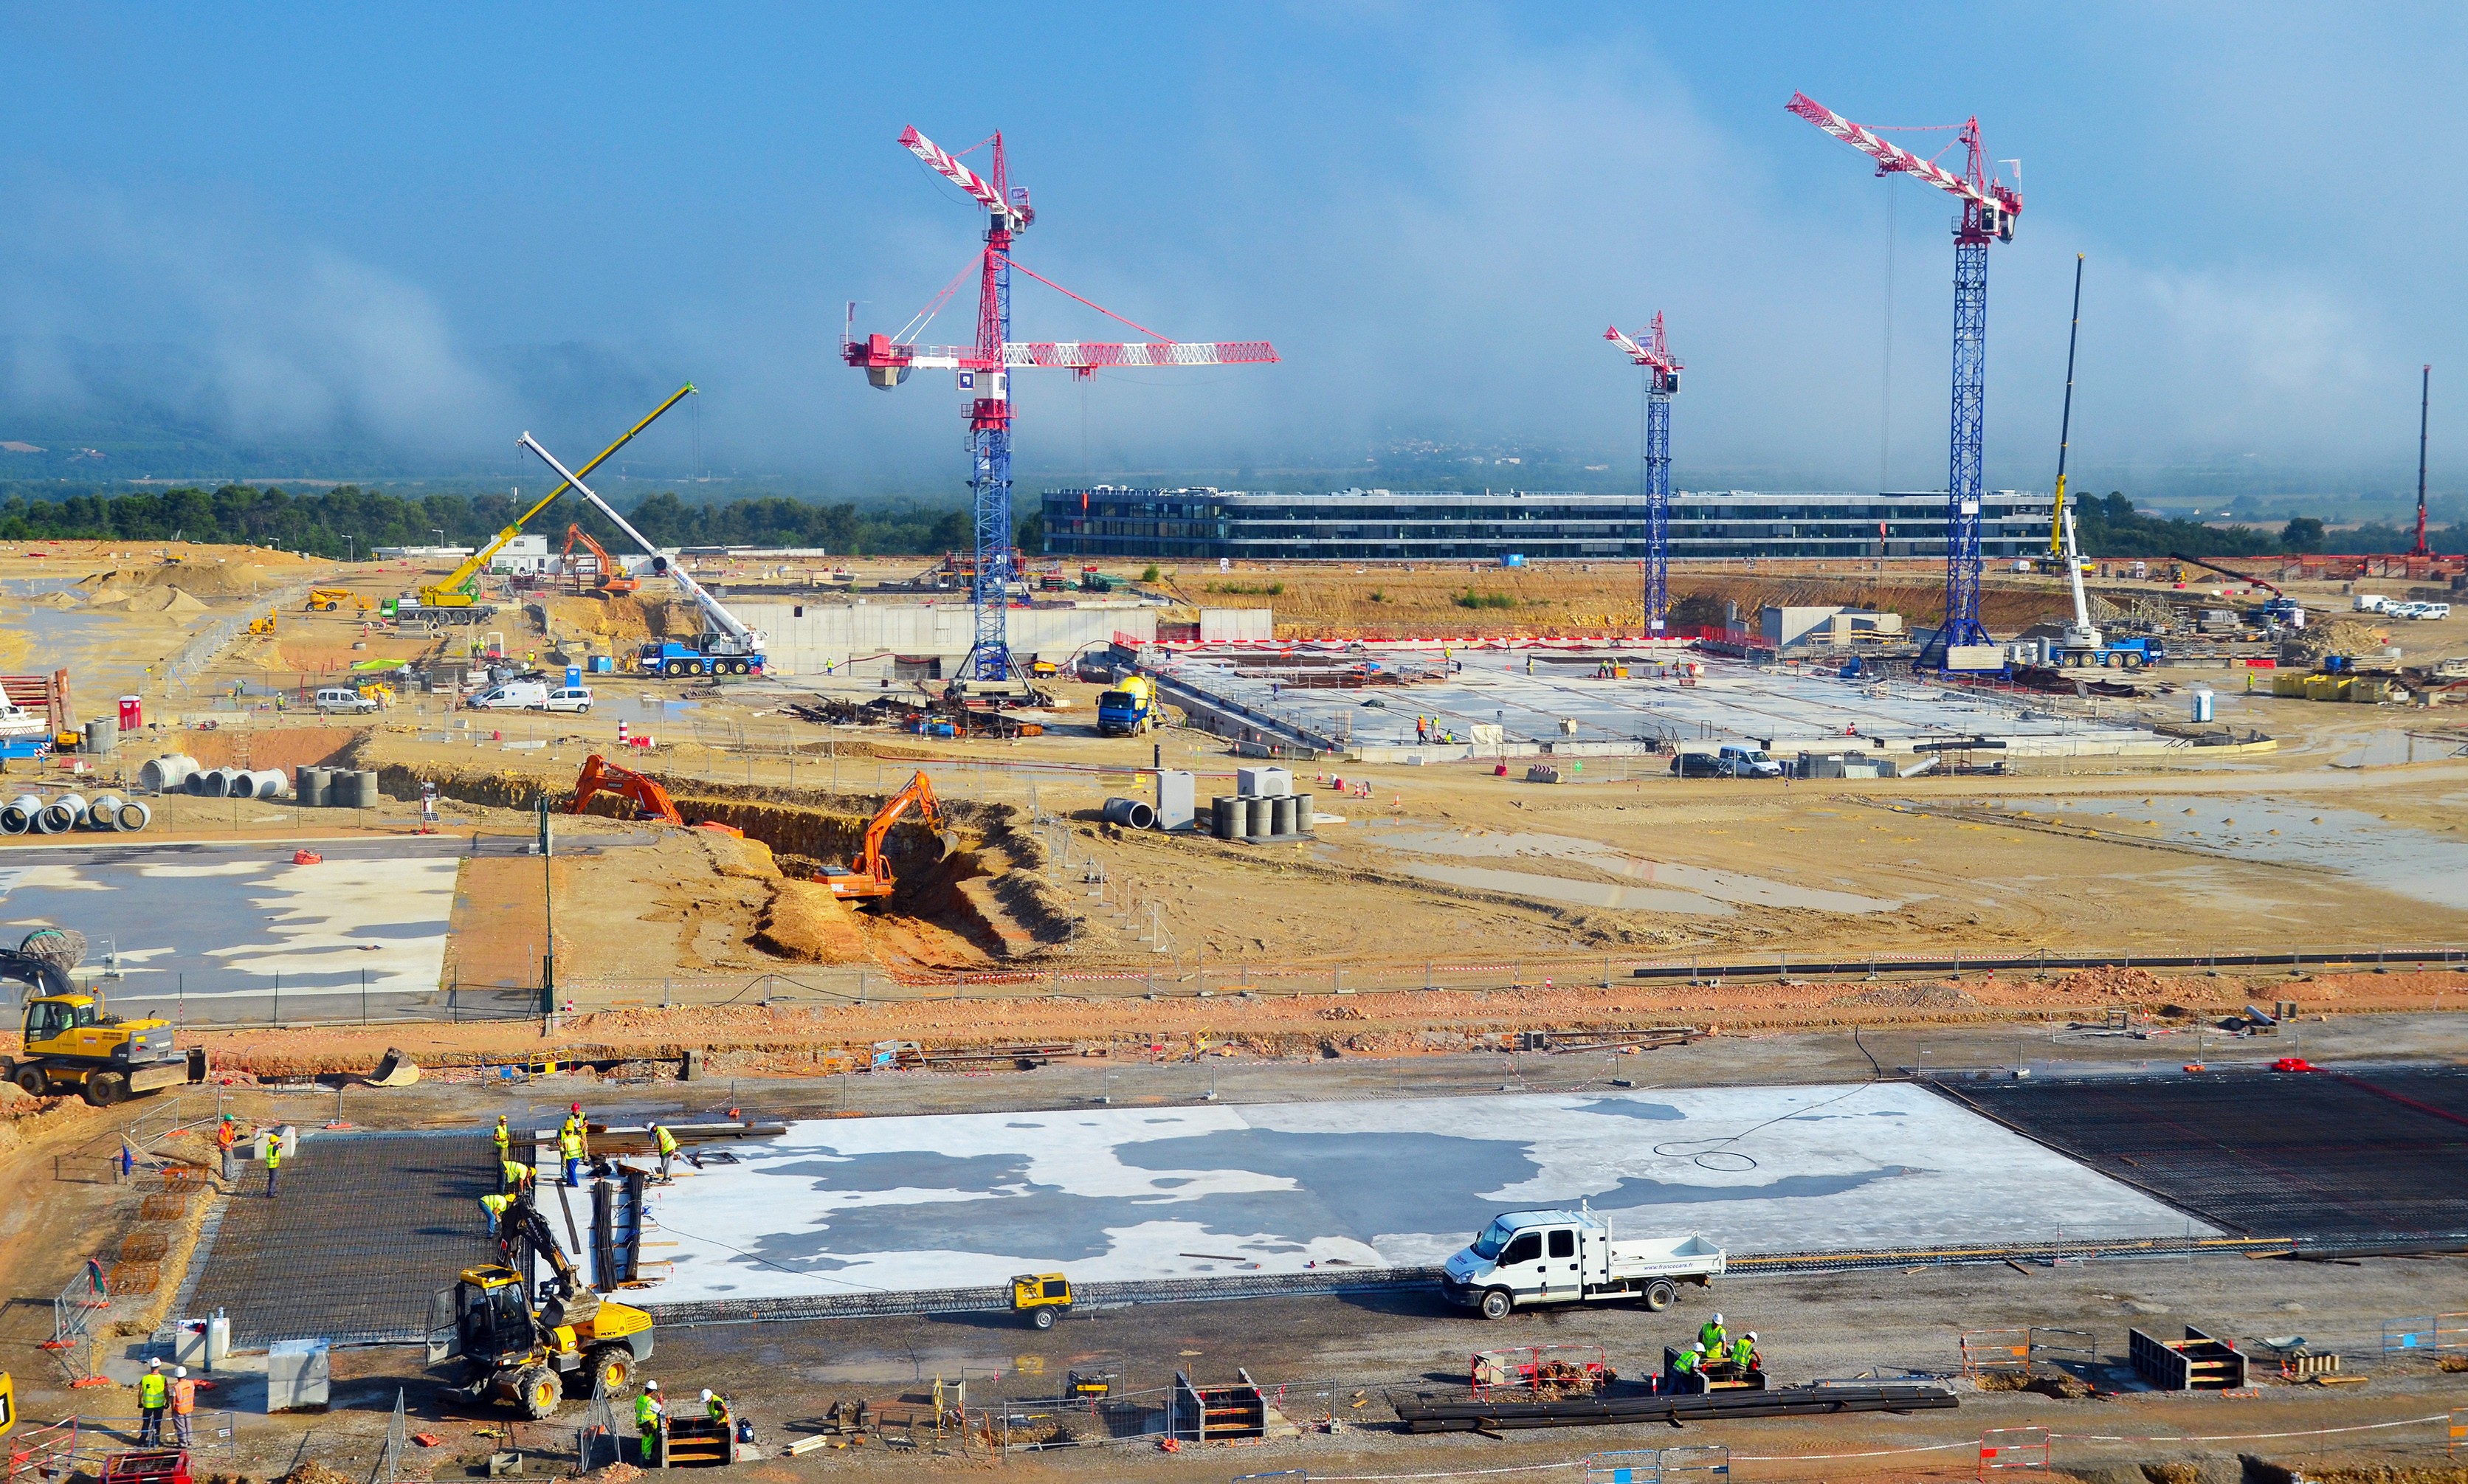 Summer postcards from the ITER worksite